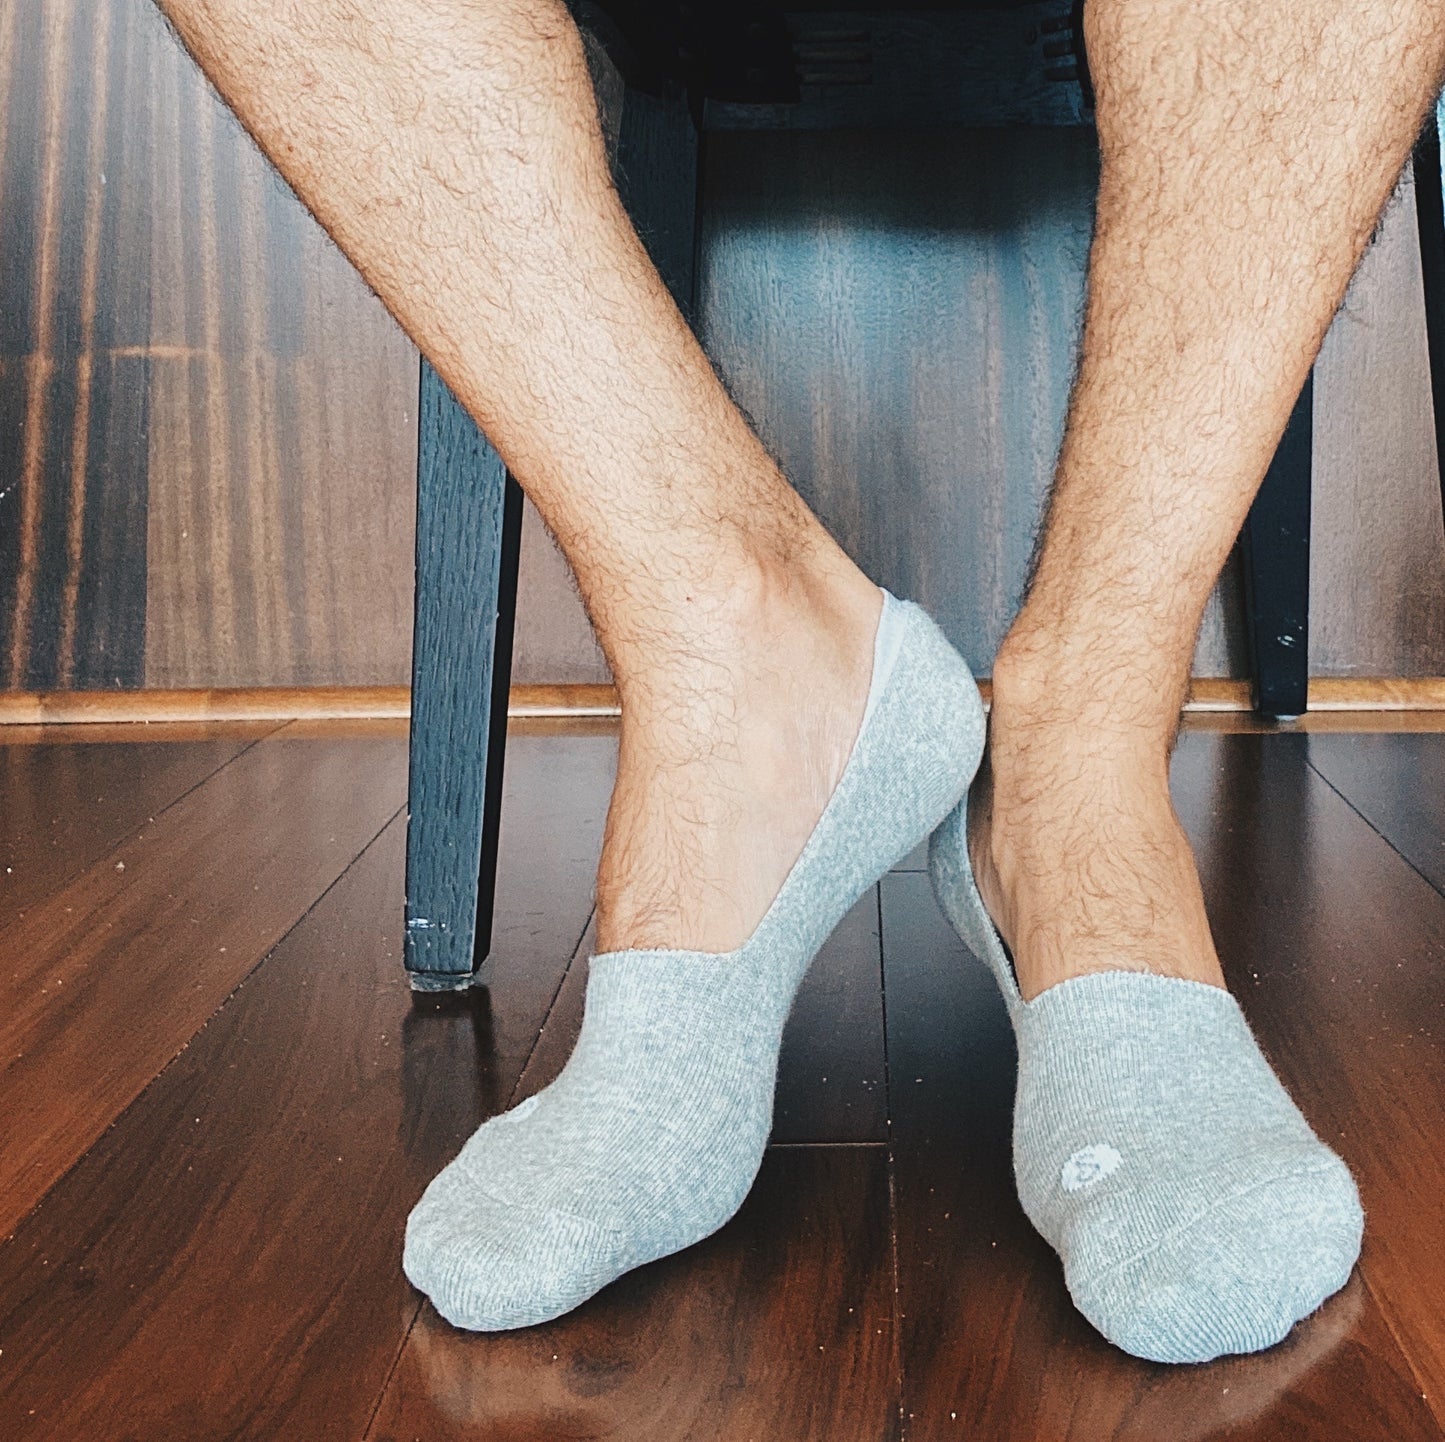 Will Extra-Thick No-Show Socks Tighten My Shoe Fit? – Skinnys